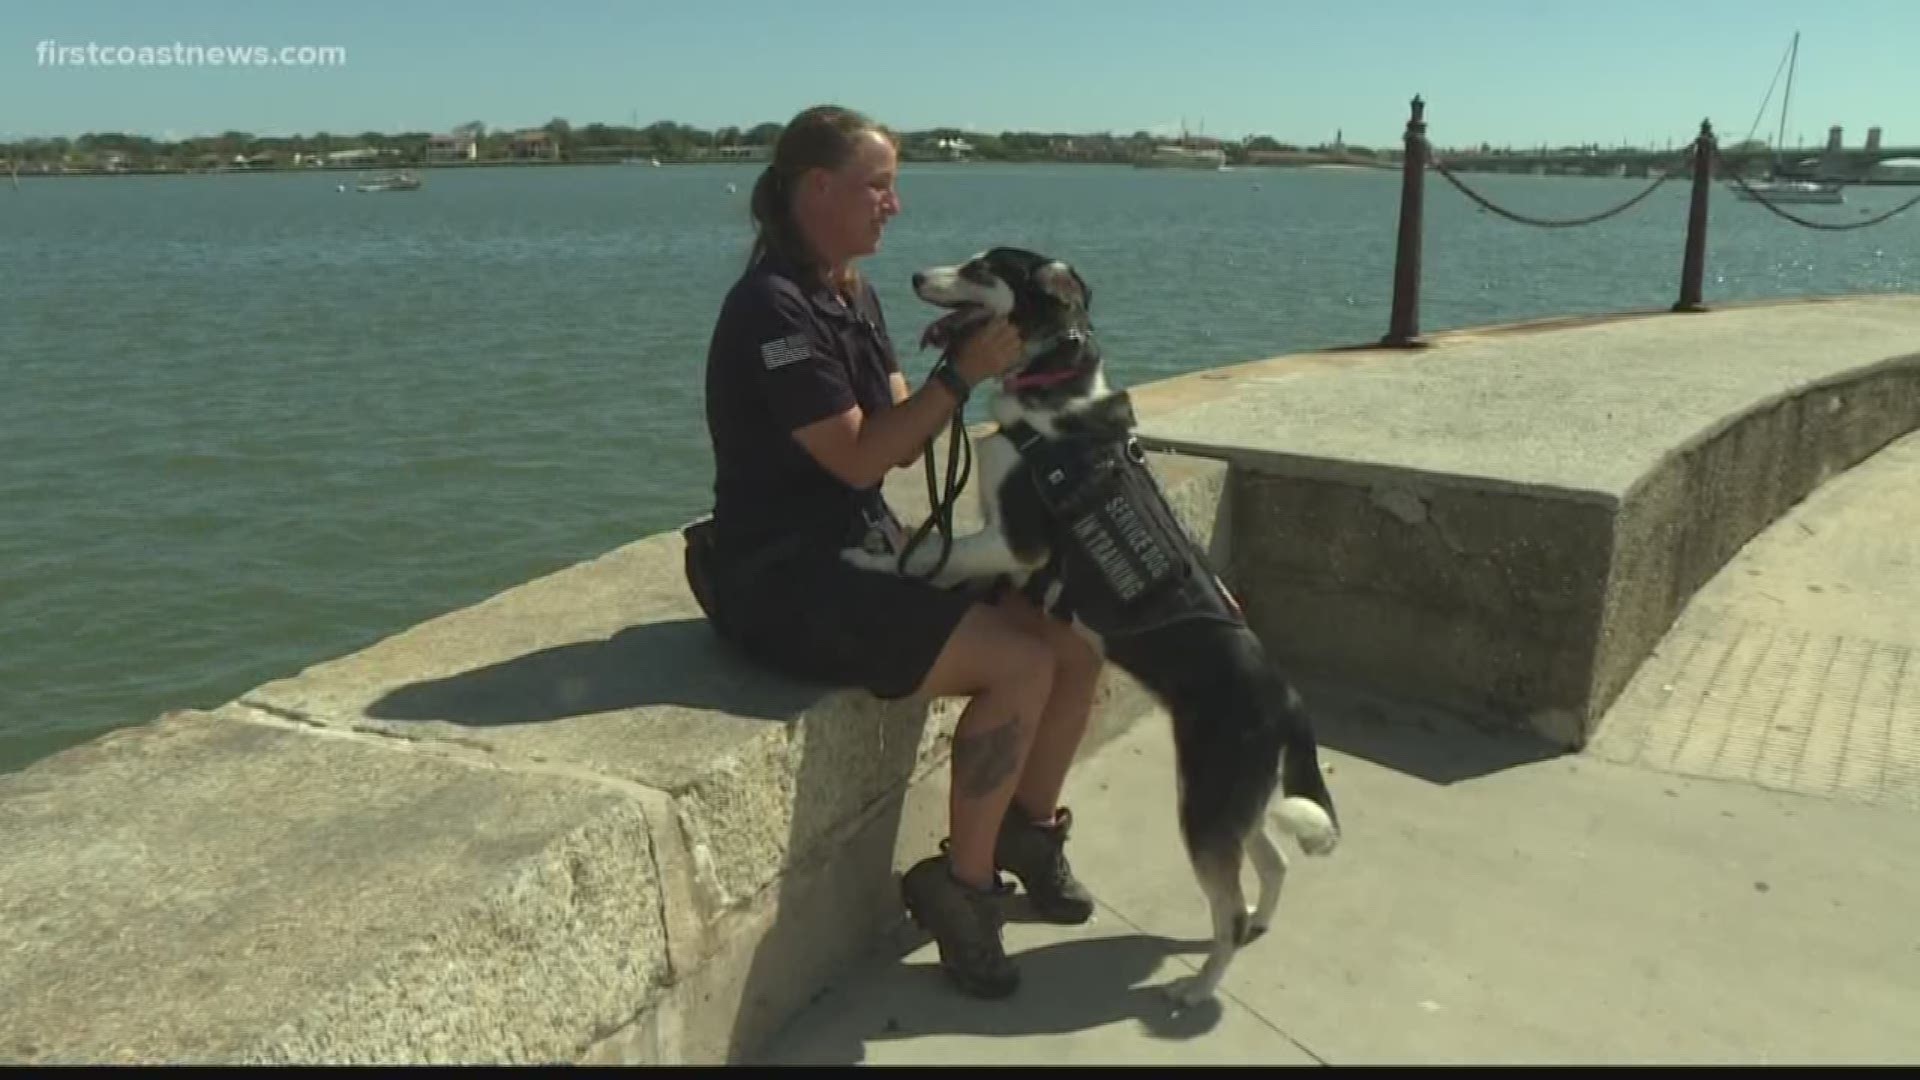 K-9s for Warriors routinely trains its service dogs in downtown St. Augustine on St. George Street, by the fort, on the bayfront and in the shops.